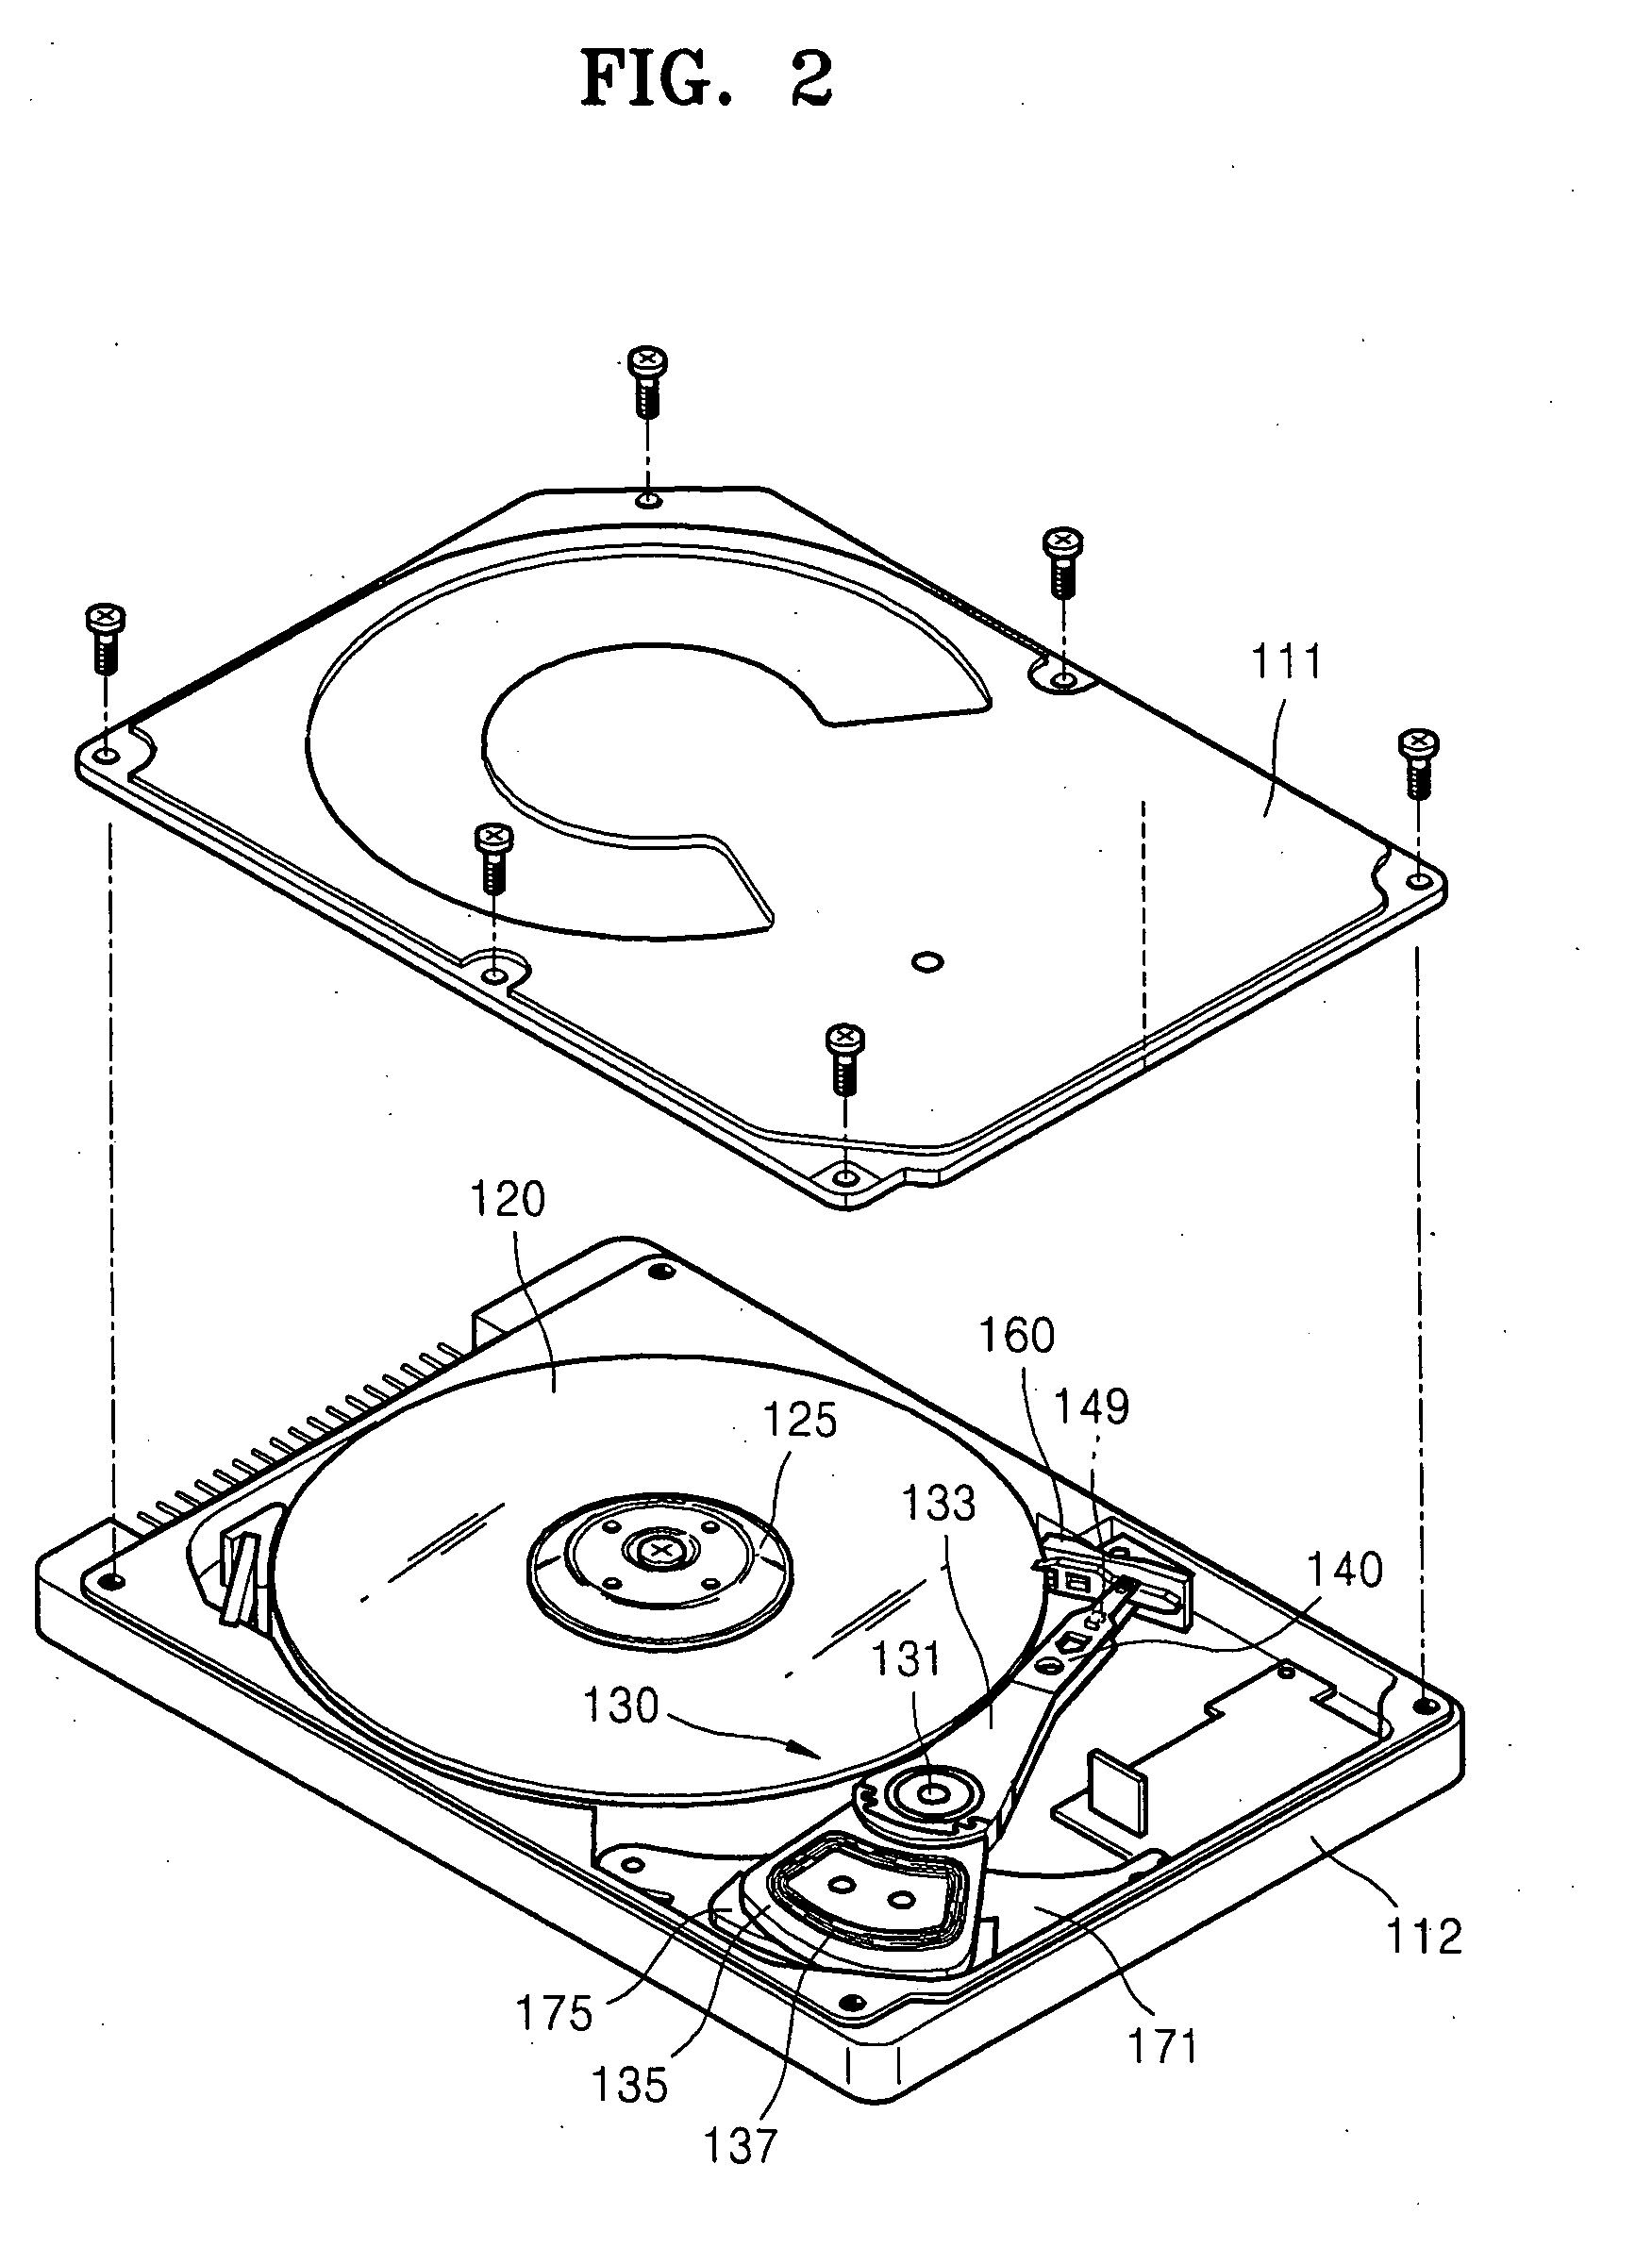 Hard disk drive, suspension assembly of actuator of hard disk drive, and method of operation of hard disk drive